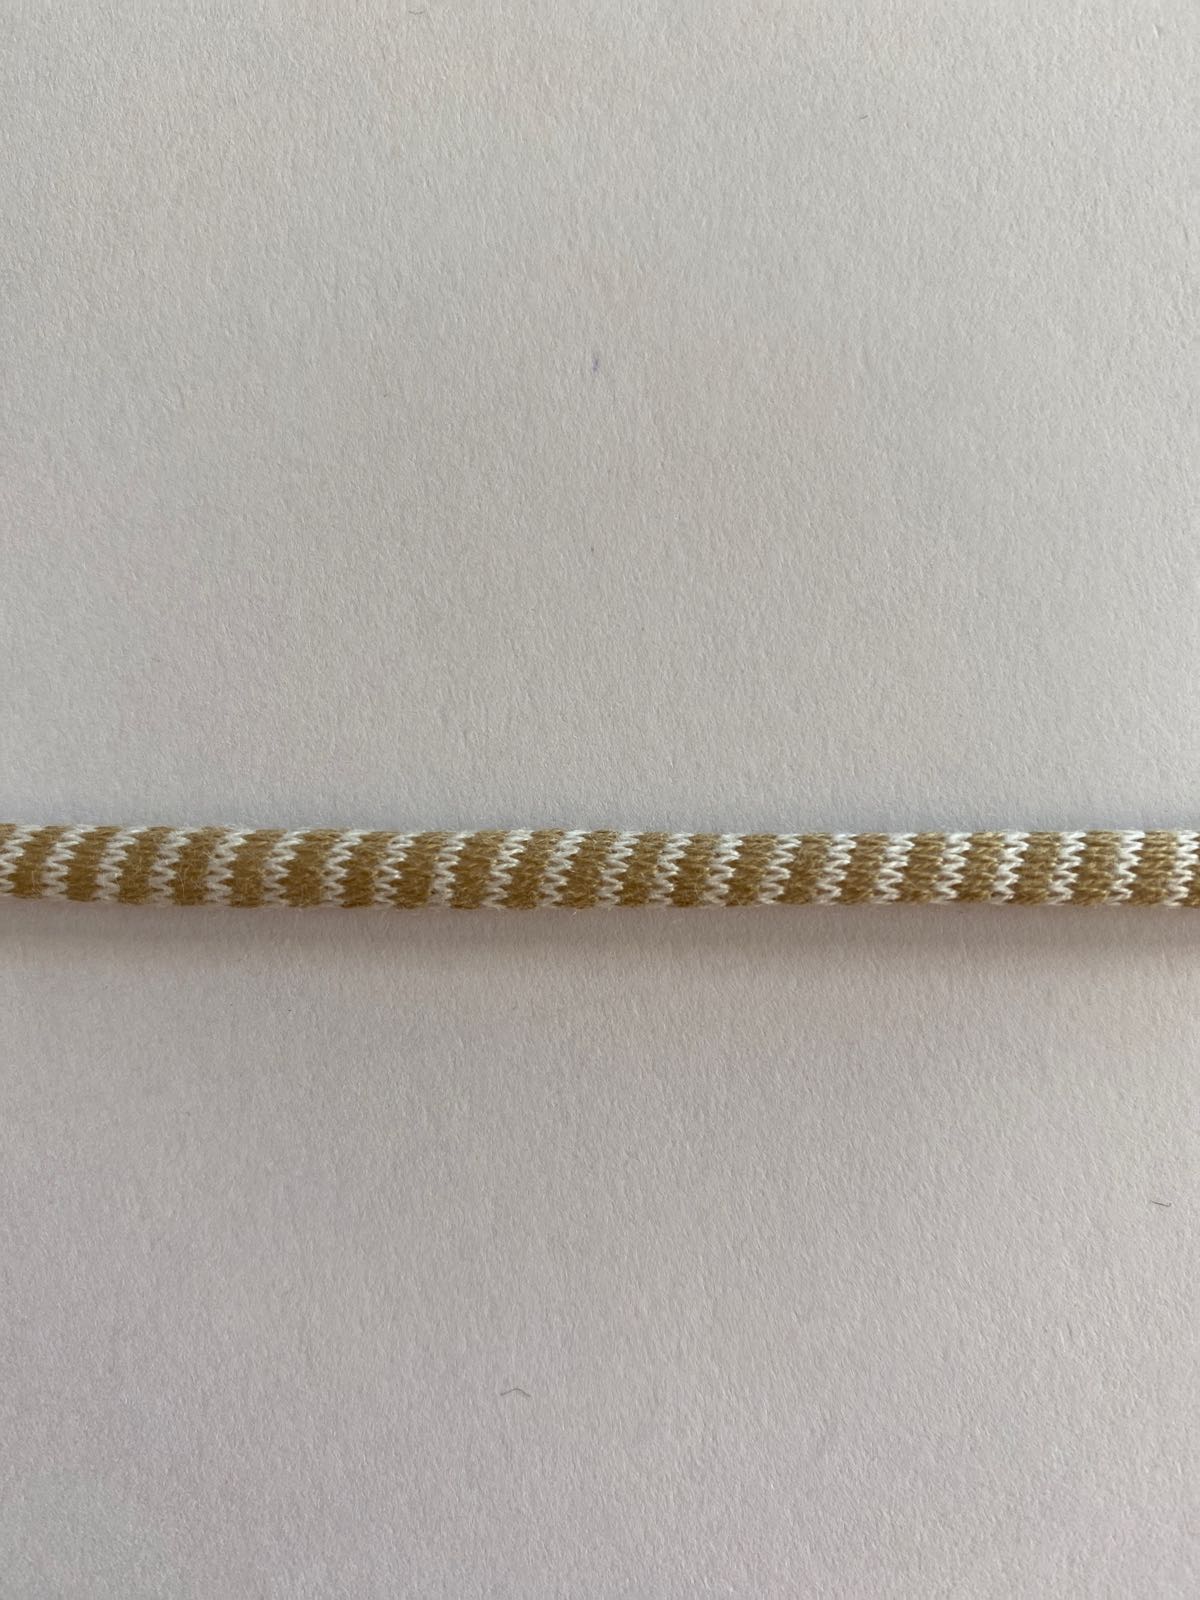 Knitted anorak cord 5 mm